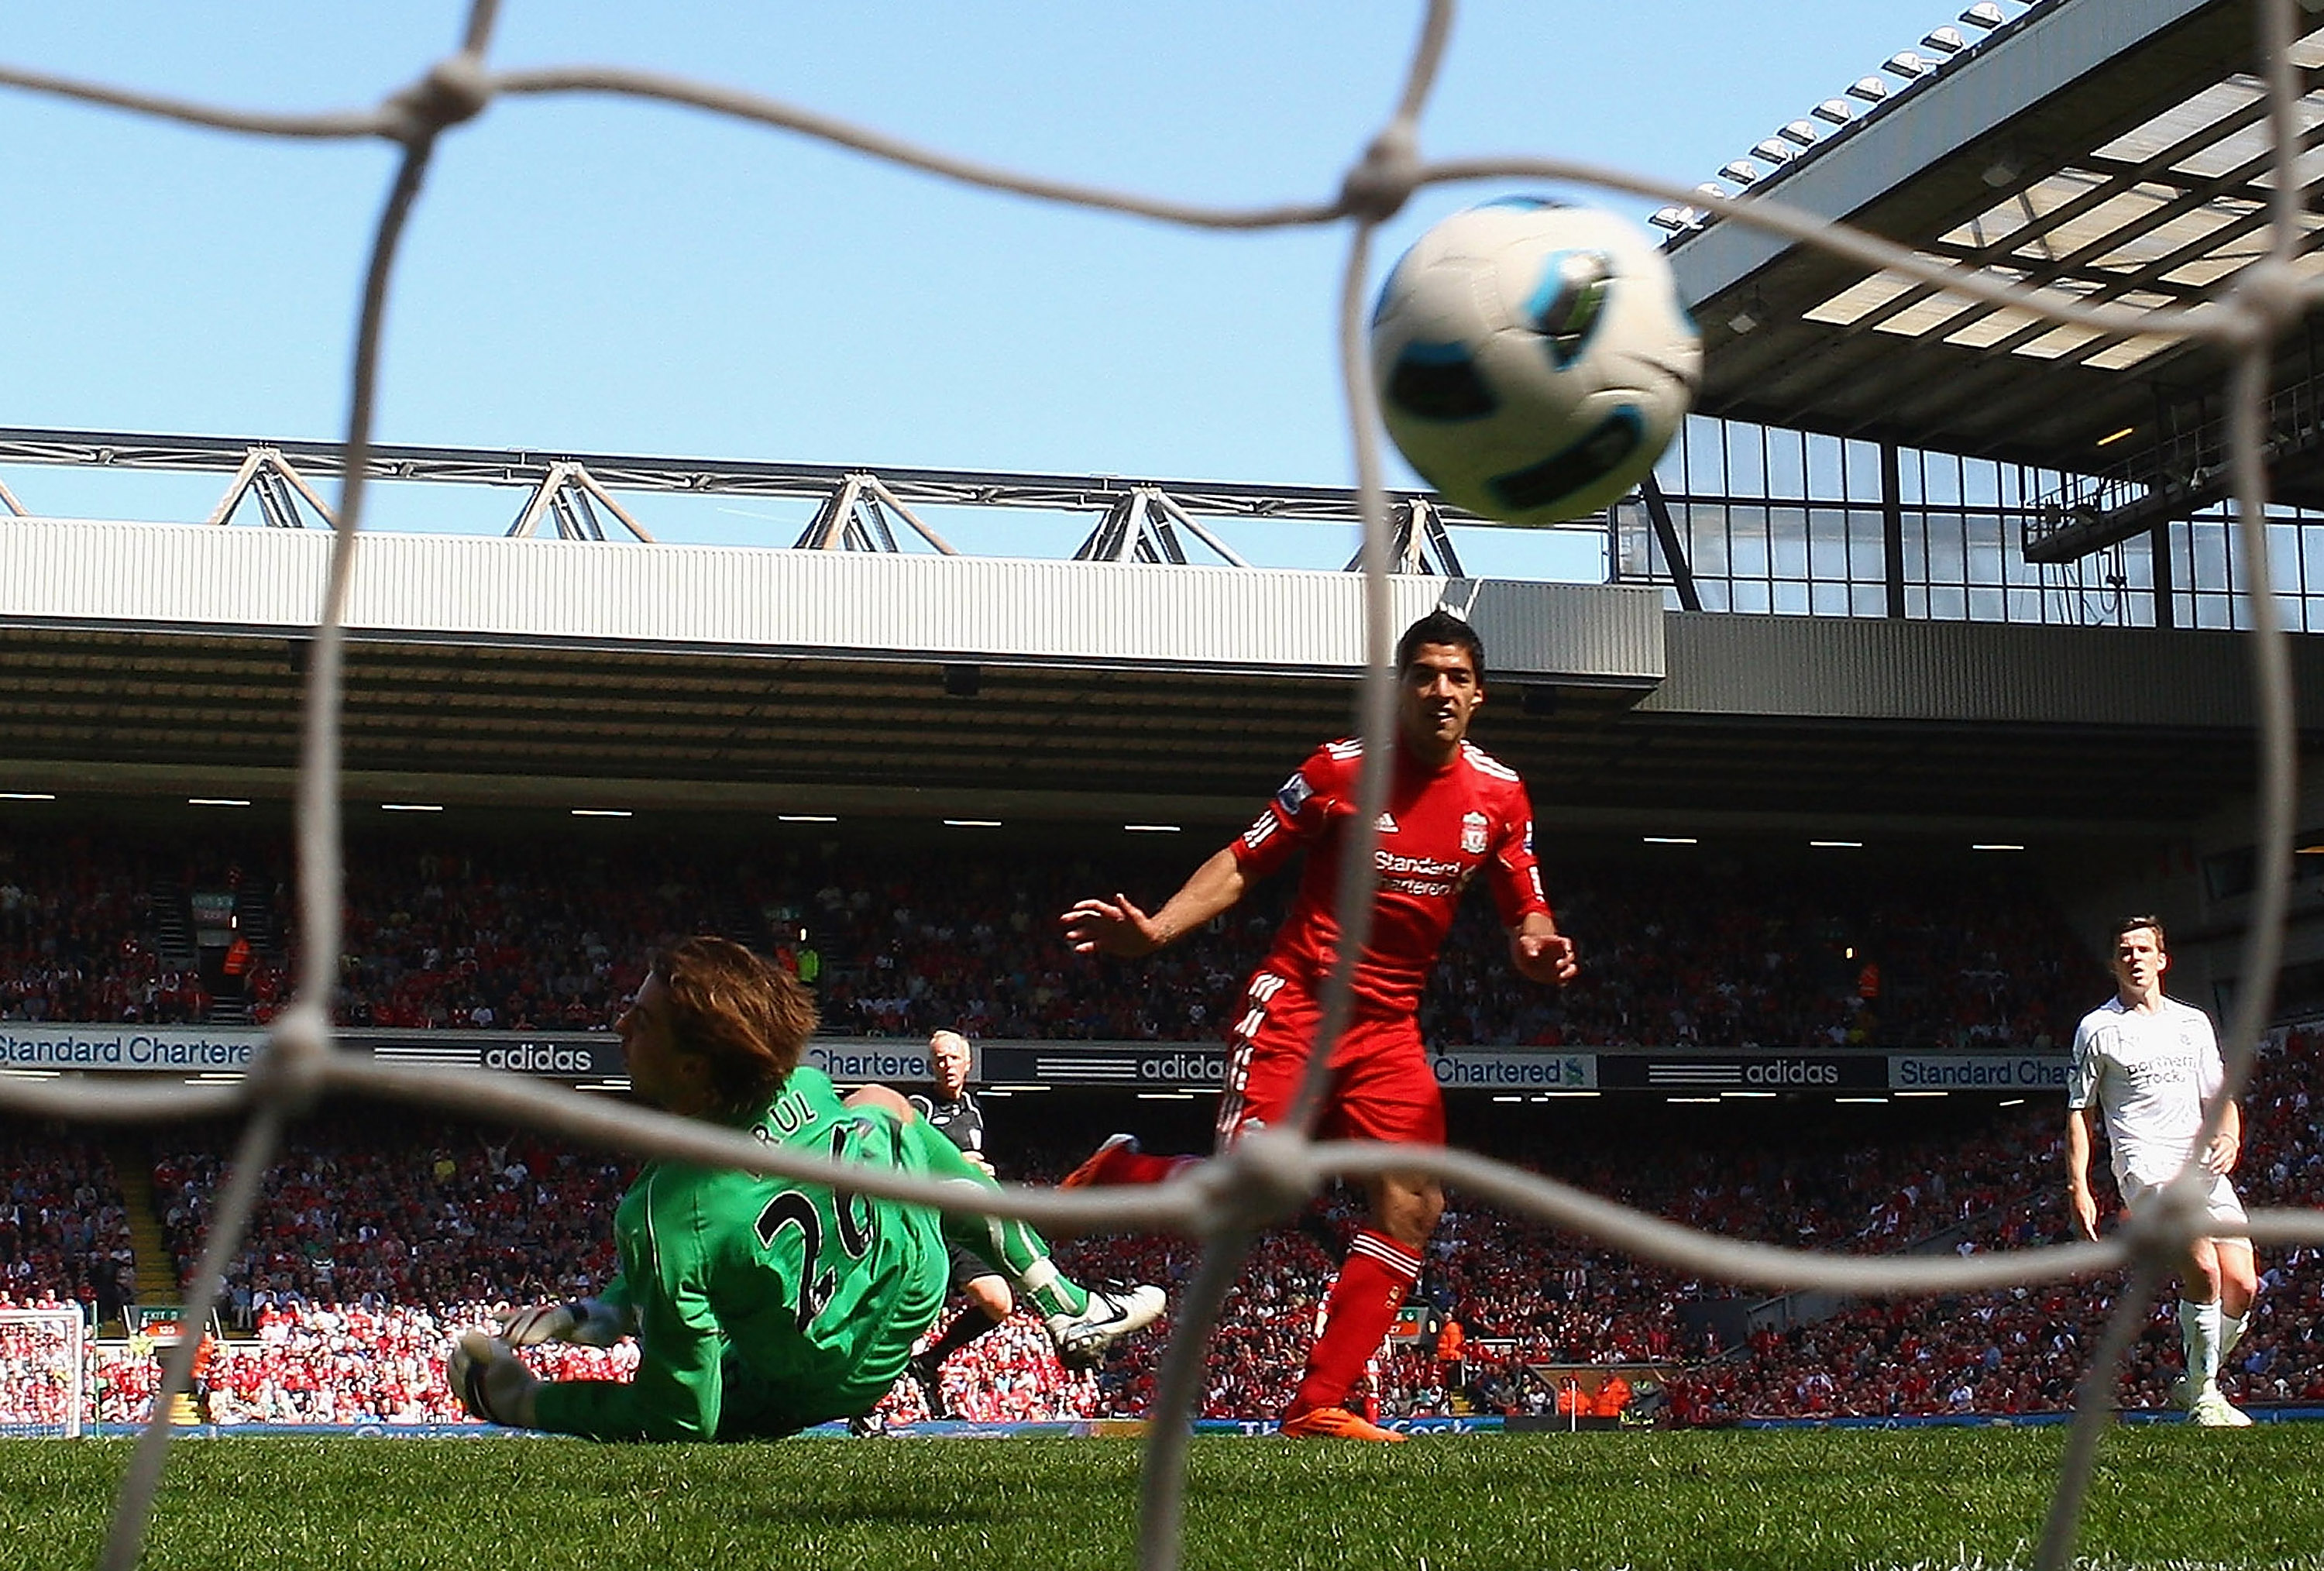 LIVERPOOL, ENGLAND - MAY 01:  Luis Suarez of Liverpool scores the third goal during the Barclays Premier League match between Liverpool  and Newcastle United at Anfield on May 1, 2011 in Liverpool, England.  (Photo by Clive Brunskill/Getty Images)